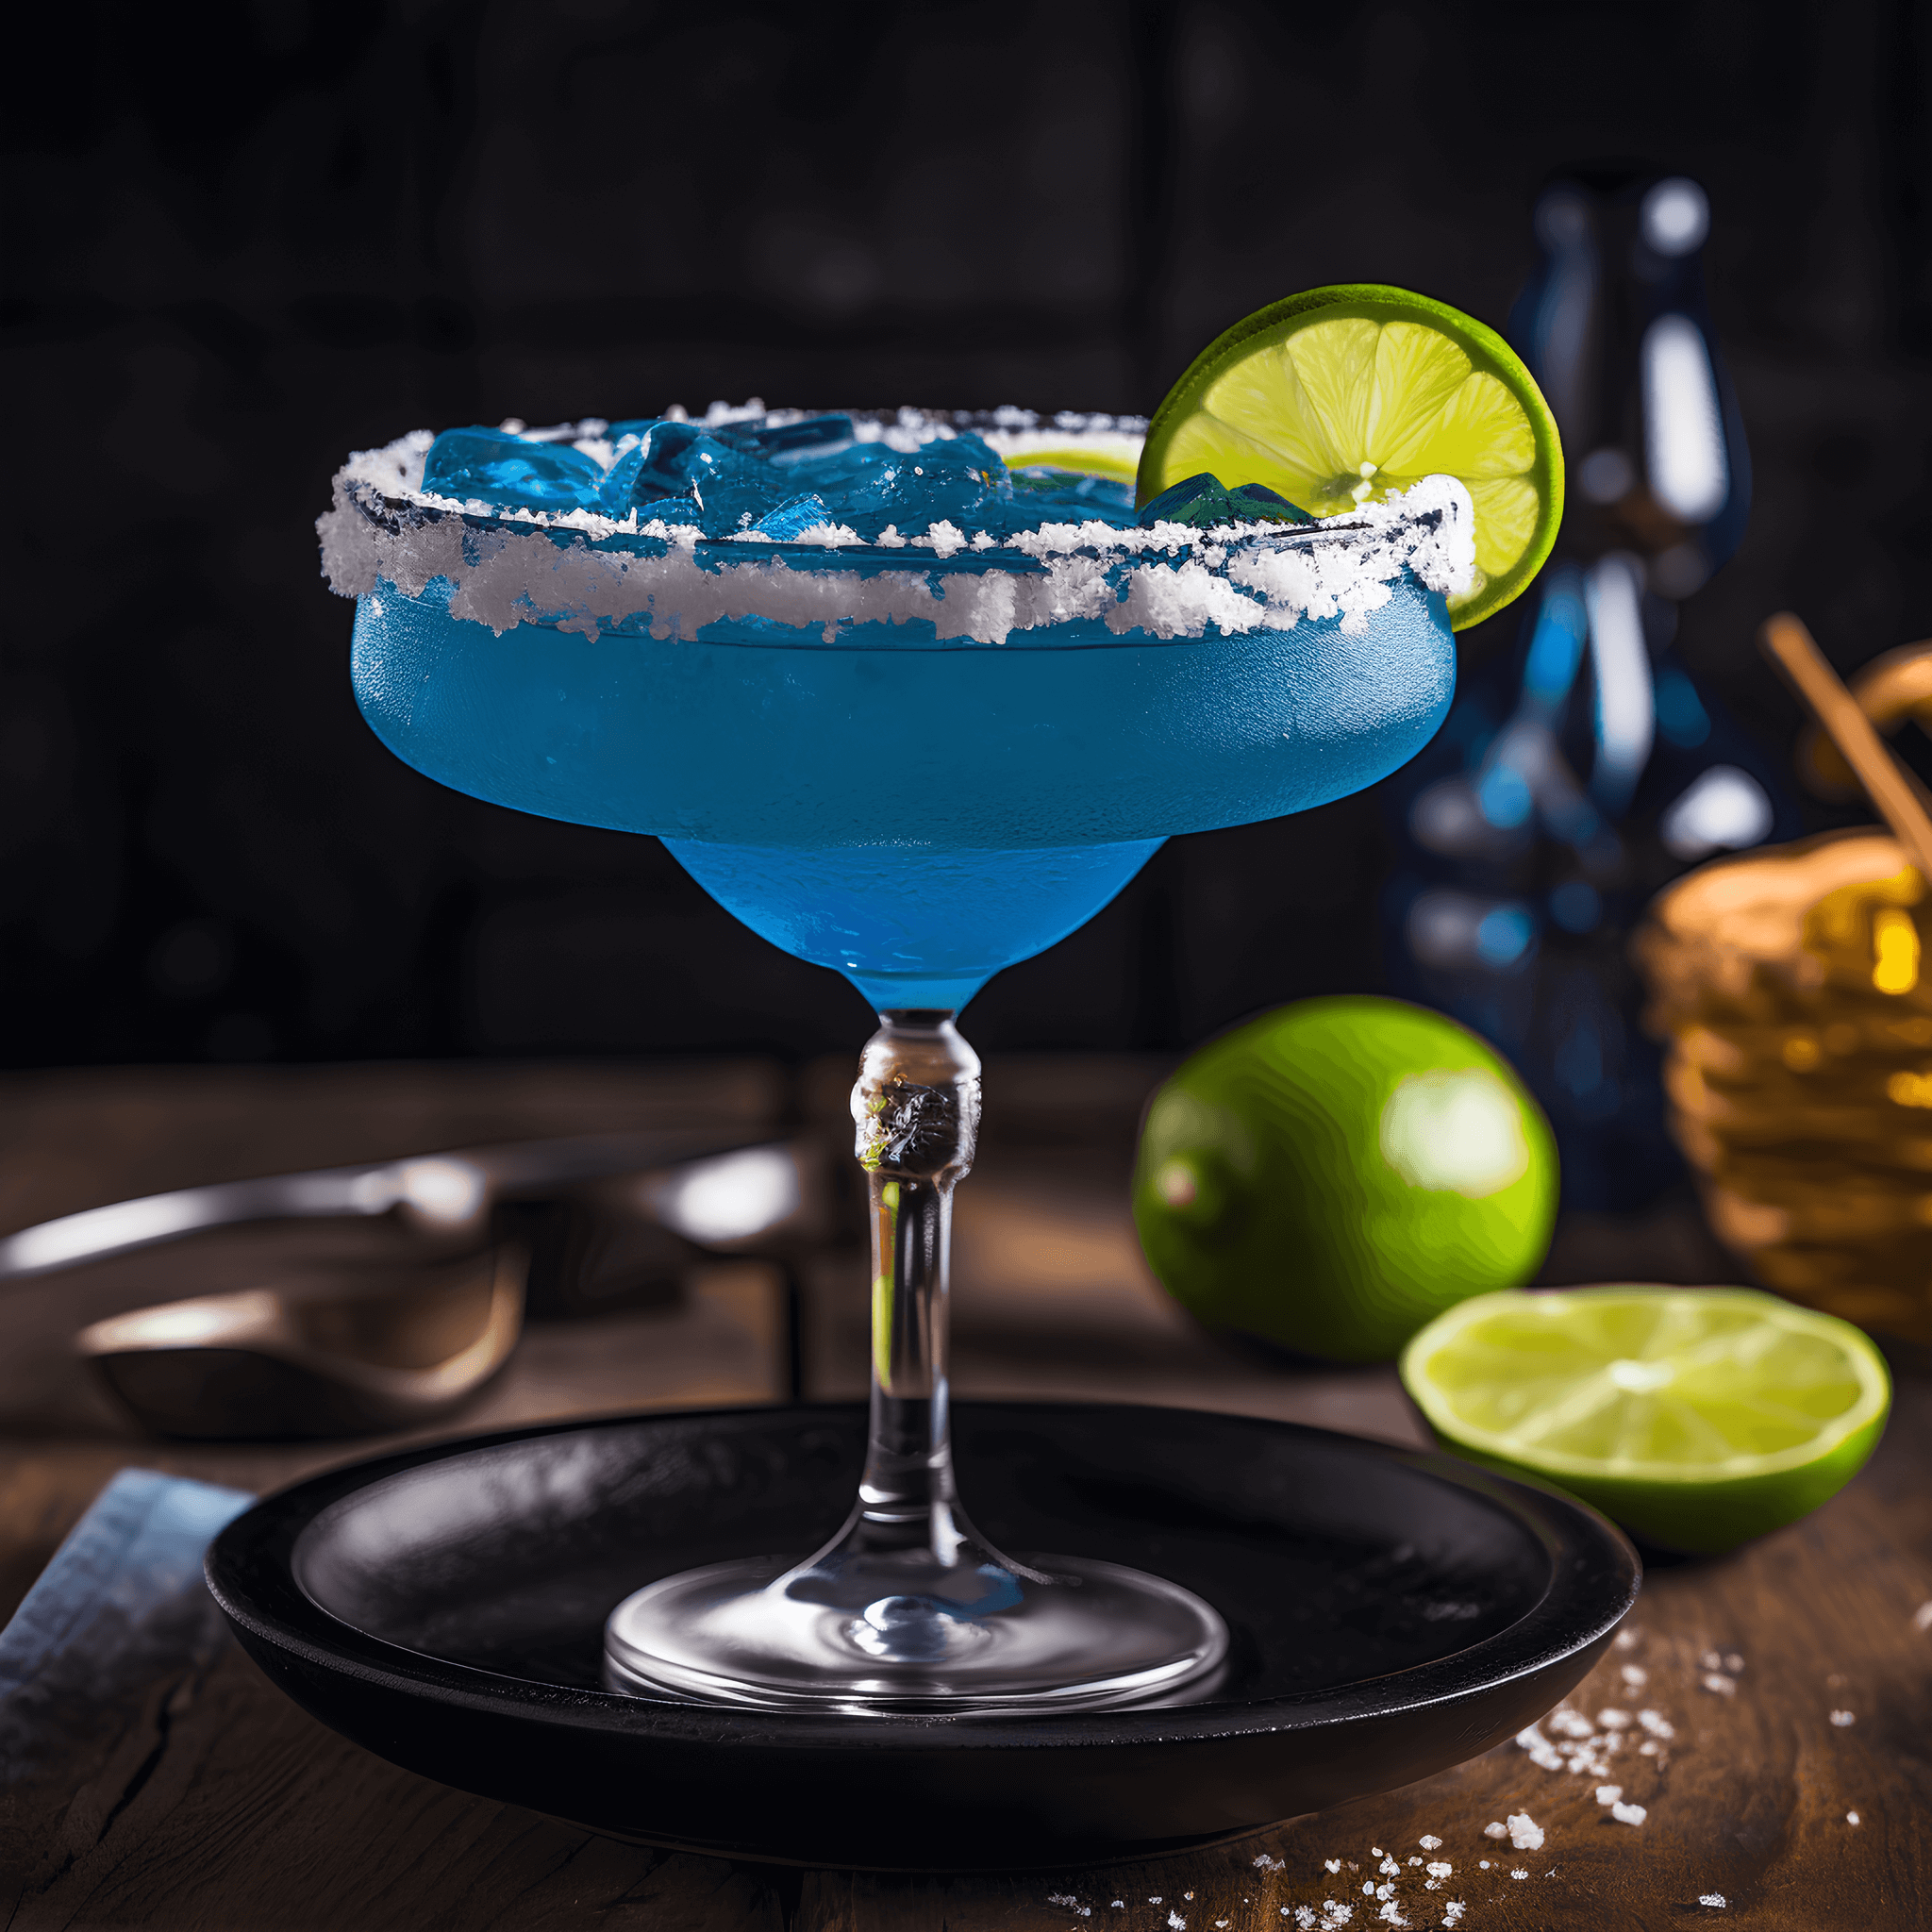 Blue Margarita Cocktail Recipe - The Blue Margarita has a well-balanced taste, combining the tangy and sour flavors of lime and orange liqueur with the sweetness of blue curaçao. It is a strong and refreshing cocktail with a hint of tropical fruitiness.